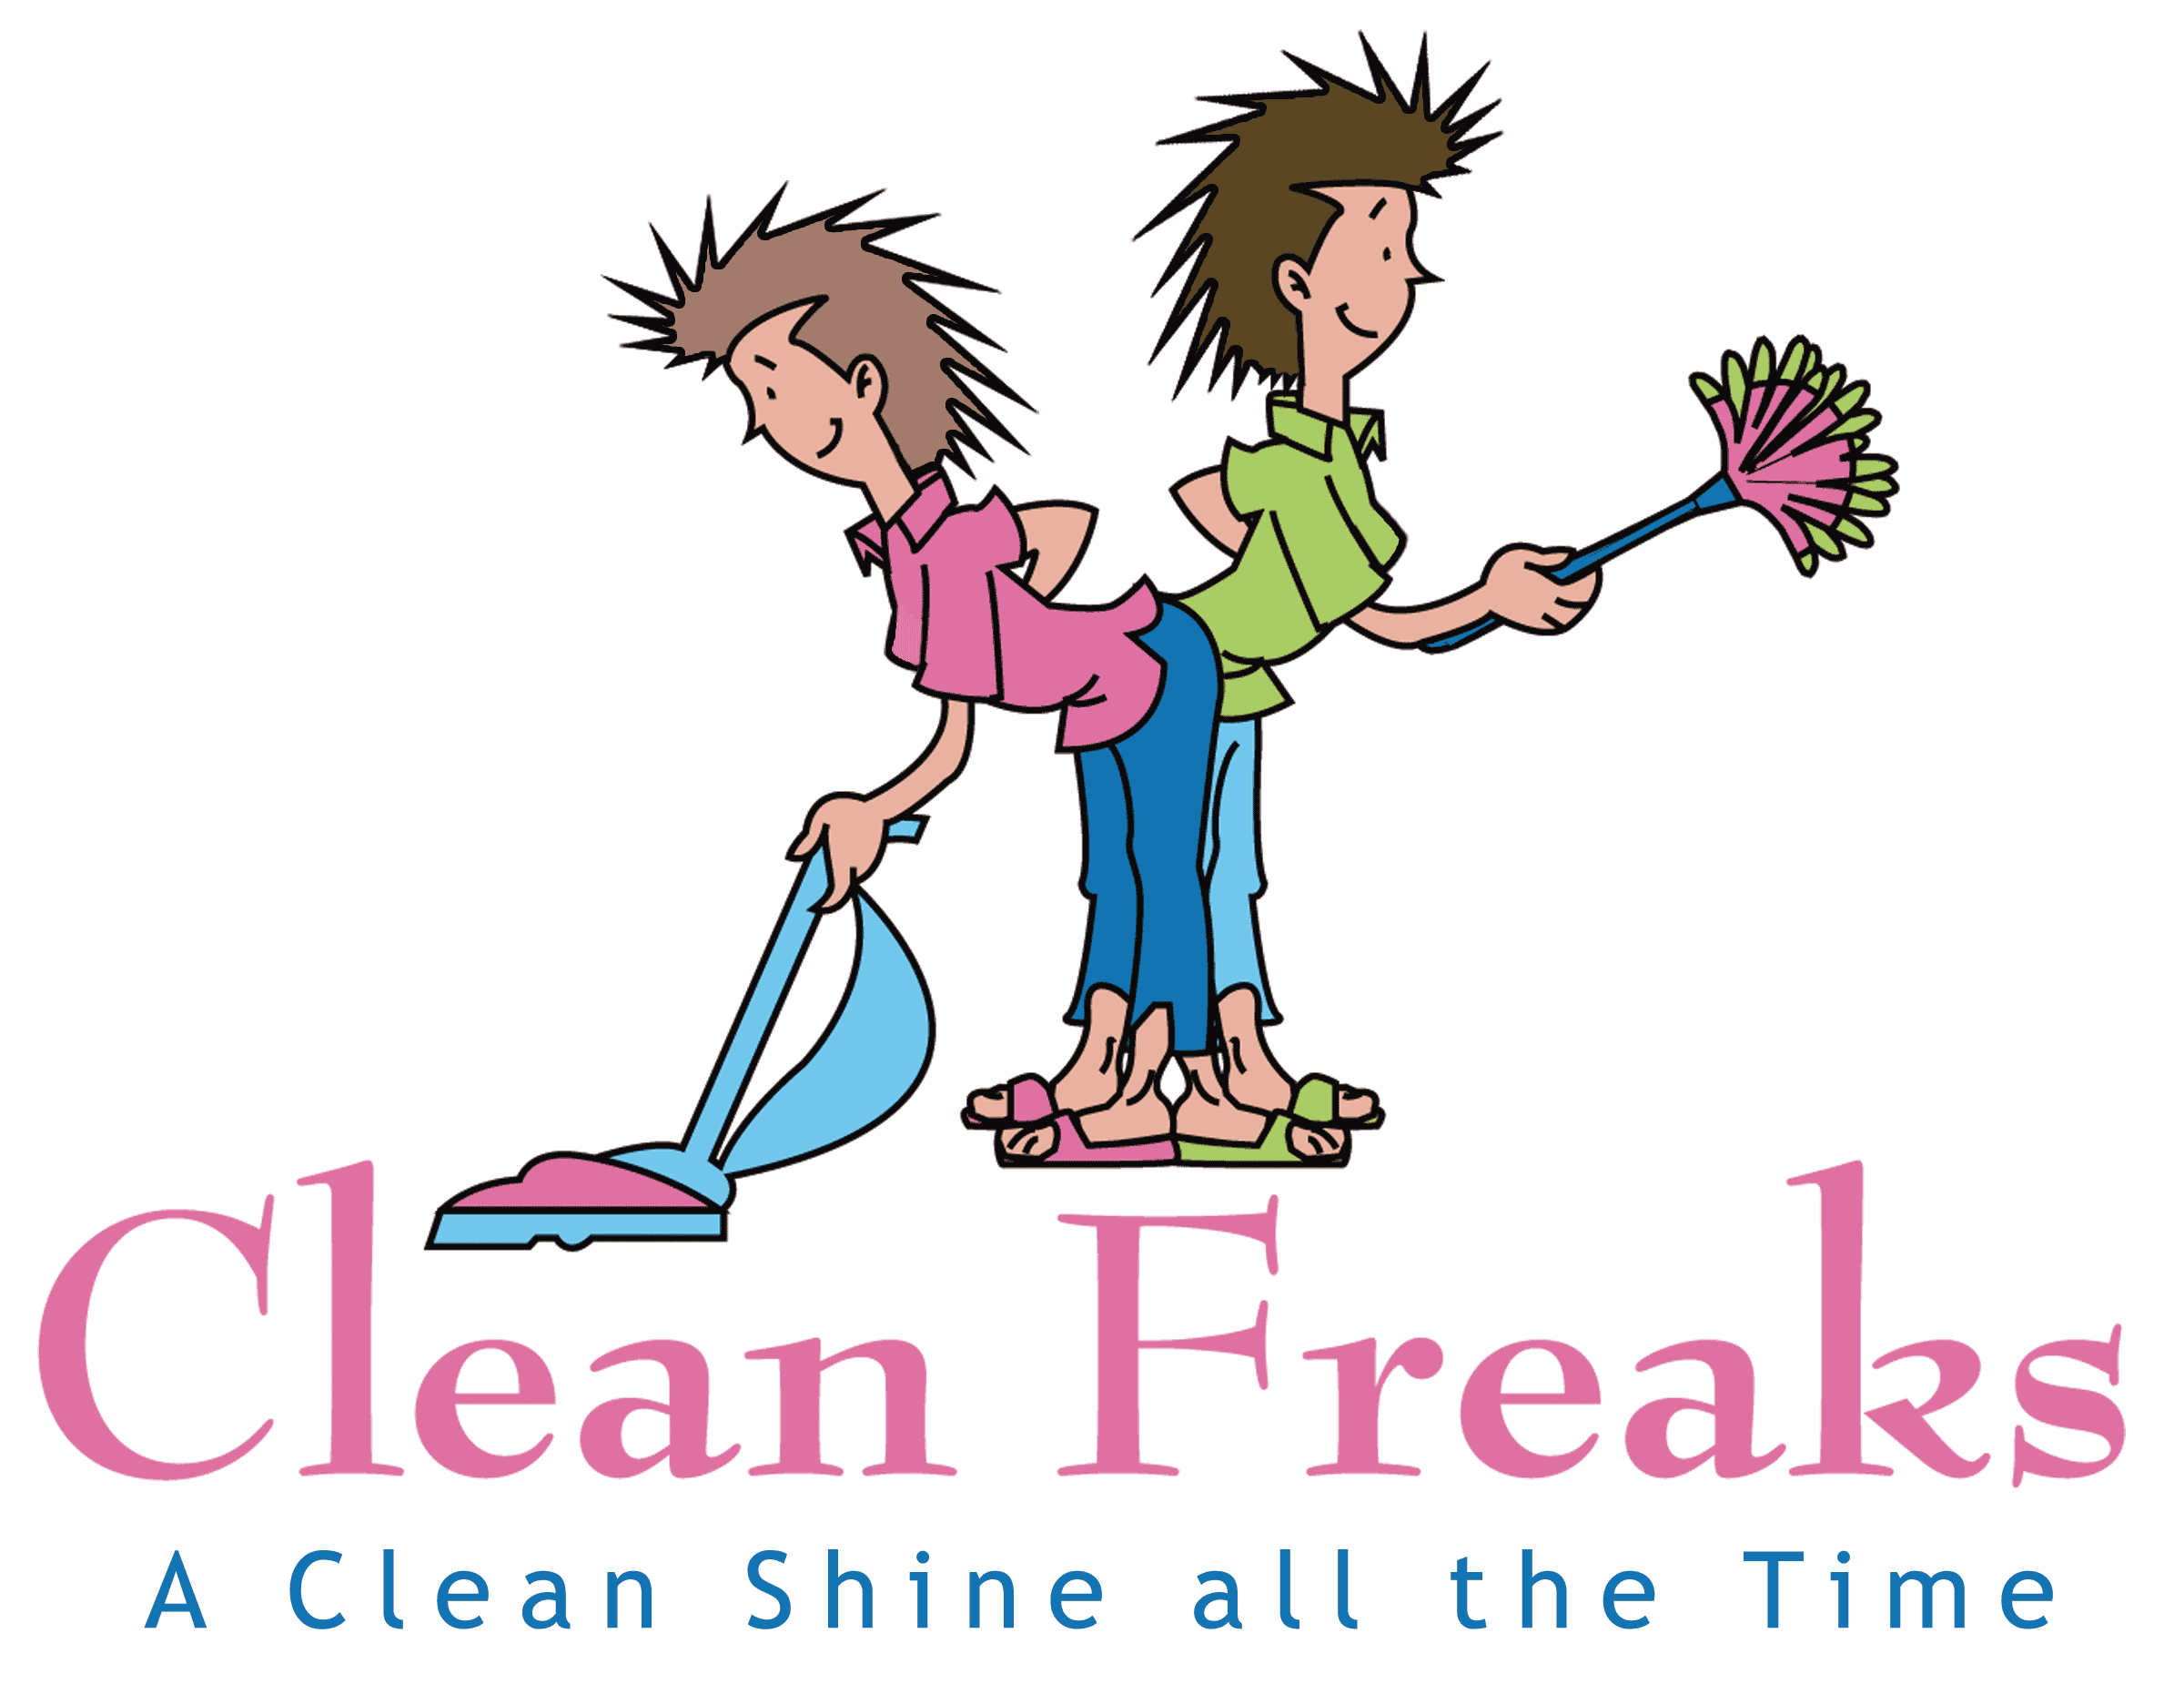 Chore clipart janitorial. Free cleaning images weekly